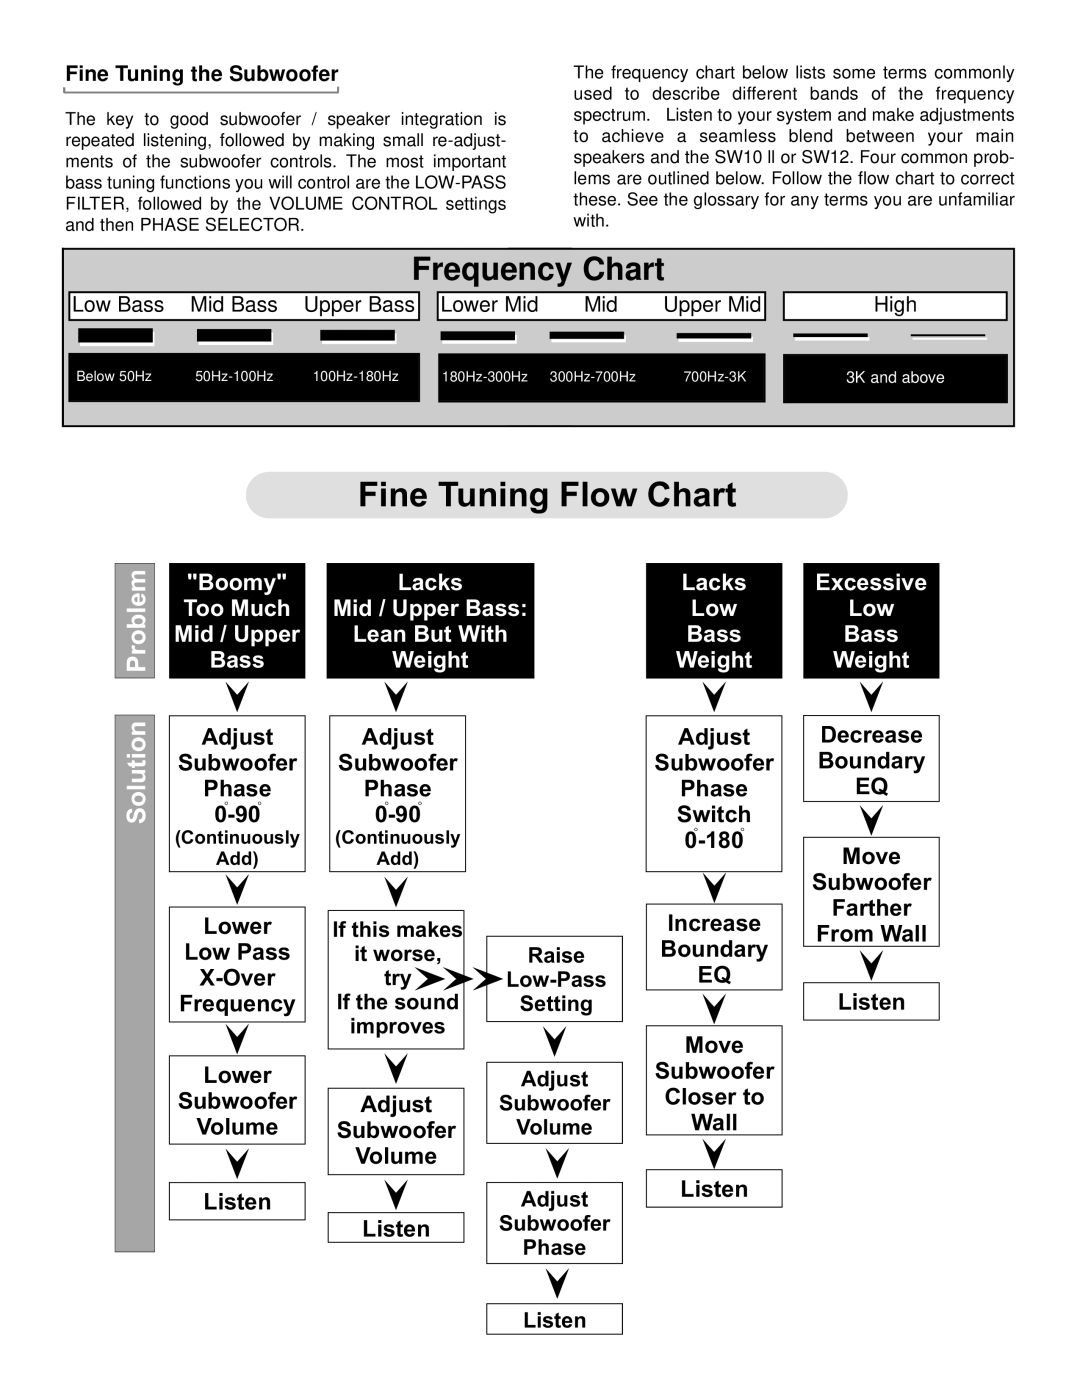 NHT SW12 Frequency Chart, Fine Tuning Flow Chart, Solution Problem, Boomy Too Much Mid / Upper Bass, Lacks Low Bass Weight 